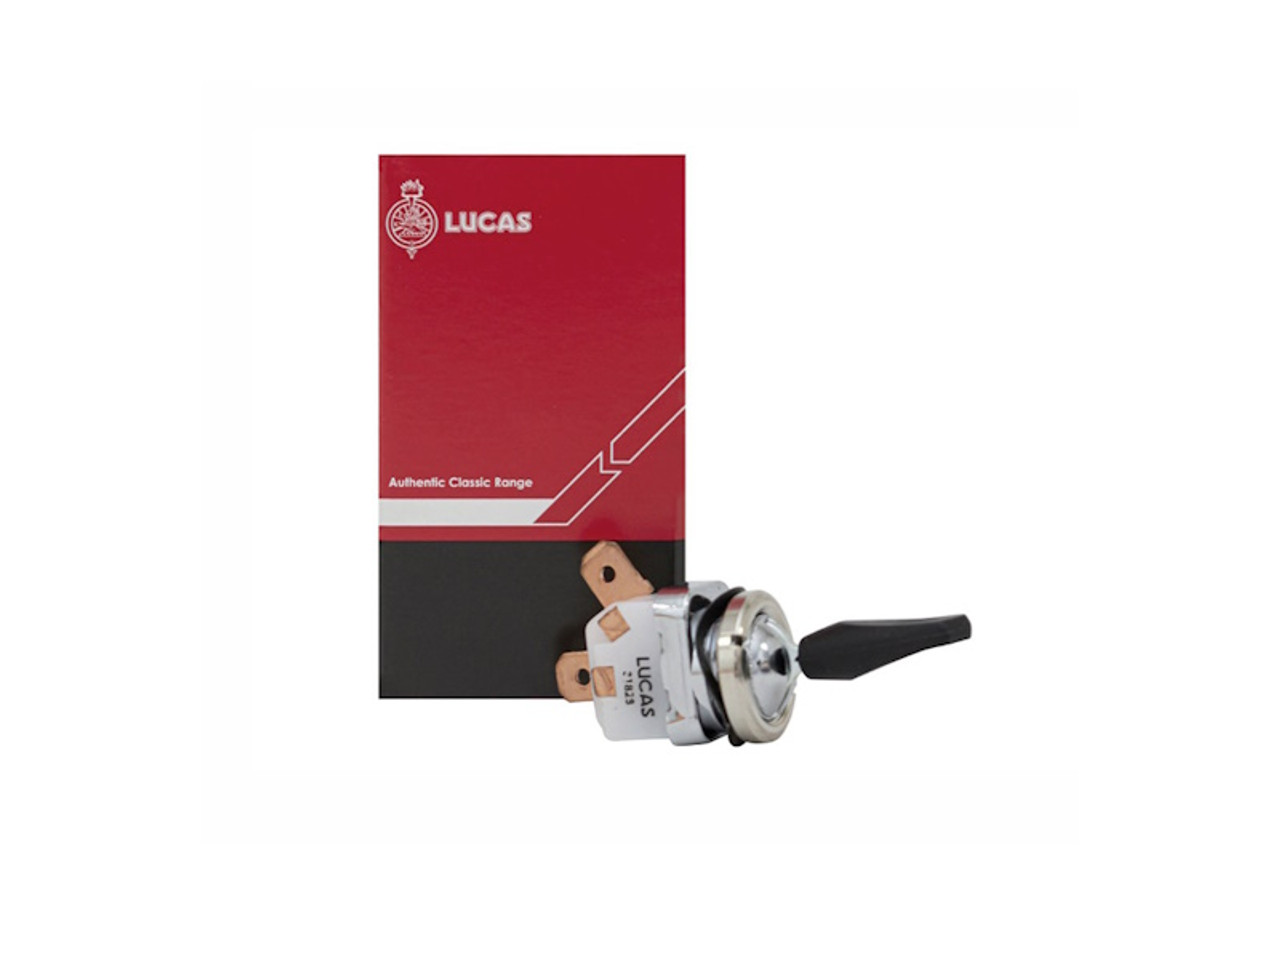 Lucas Series 2a and Series 3 Panel Light Switch - RTC430